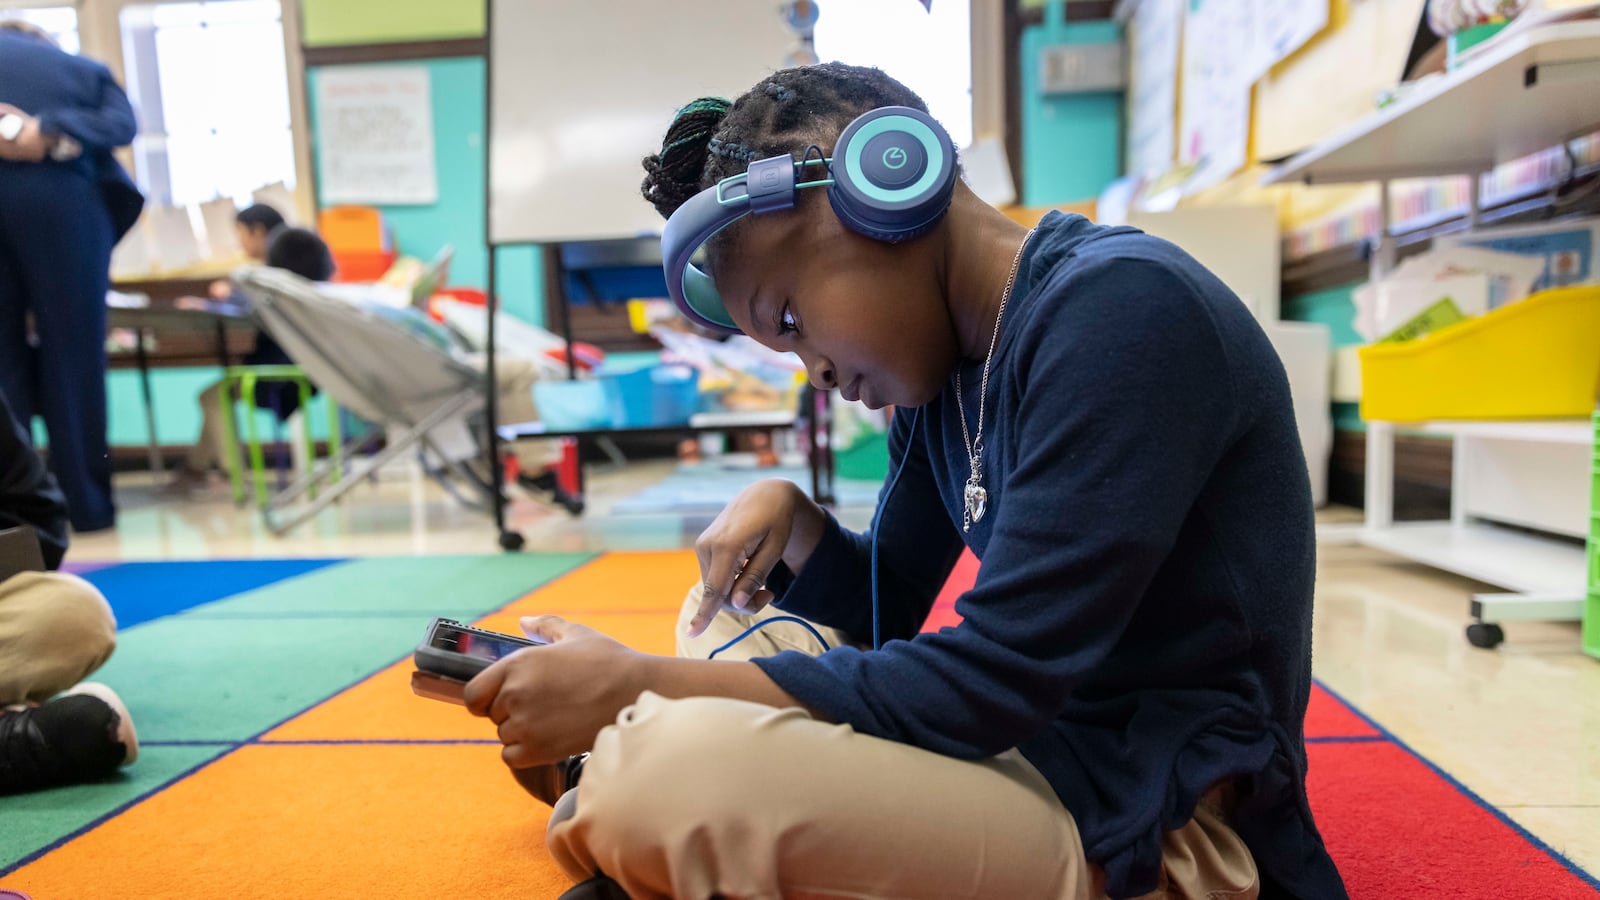 A young girl works on a tablet, wearing blue headphones while sitting on the floor.